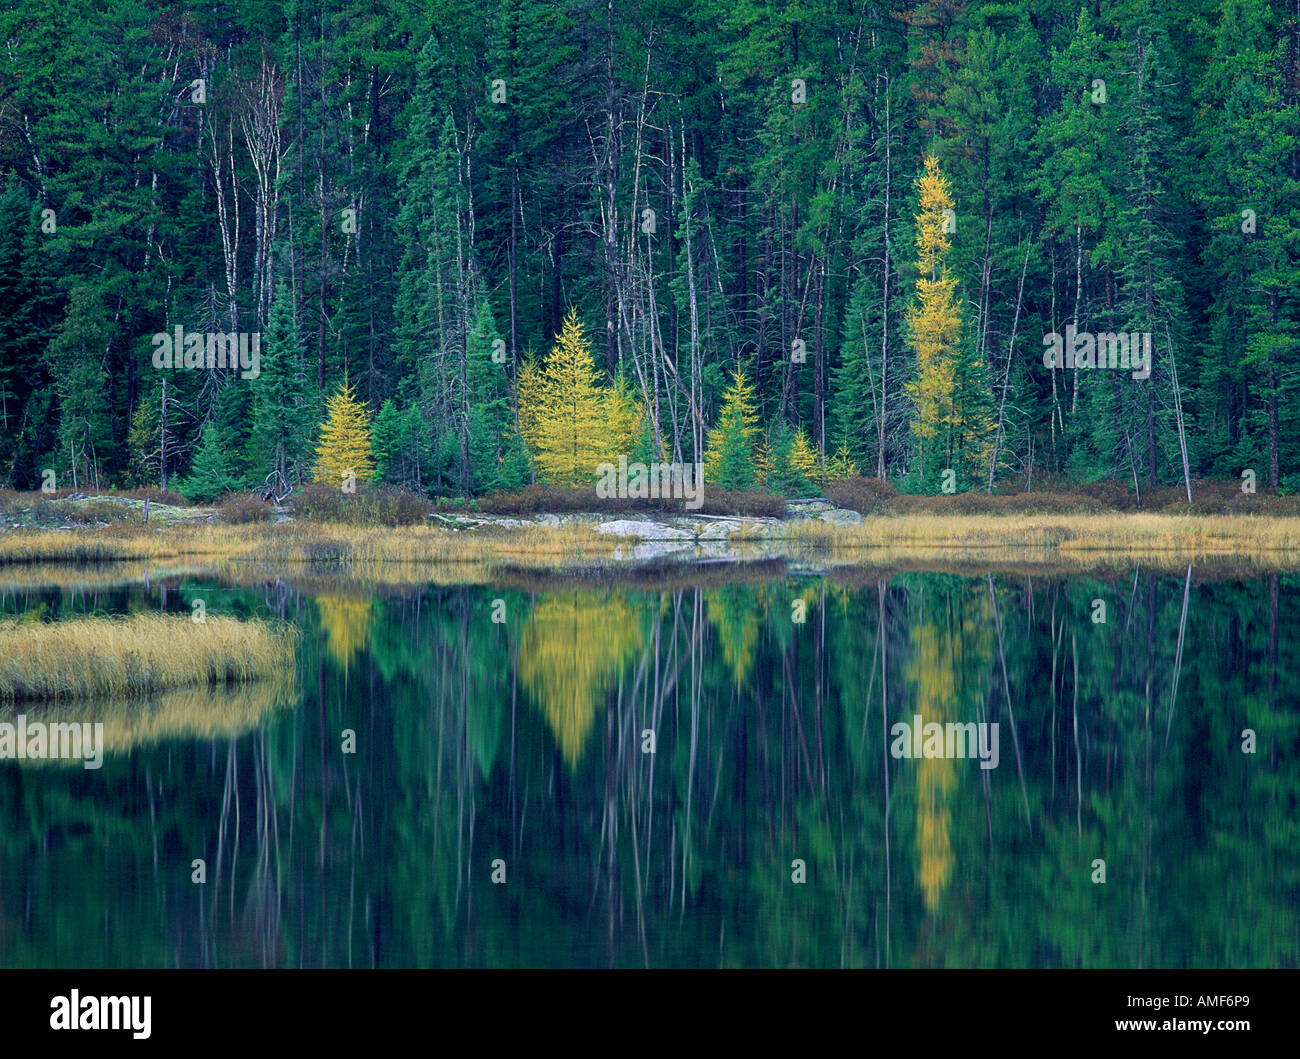 Forest in Autumn with Reflections On Lake, near Kenora, Ontario, Canada Stock Photo